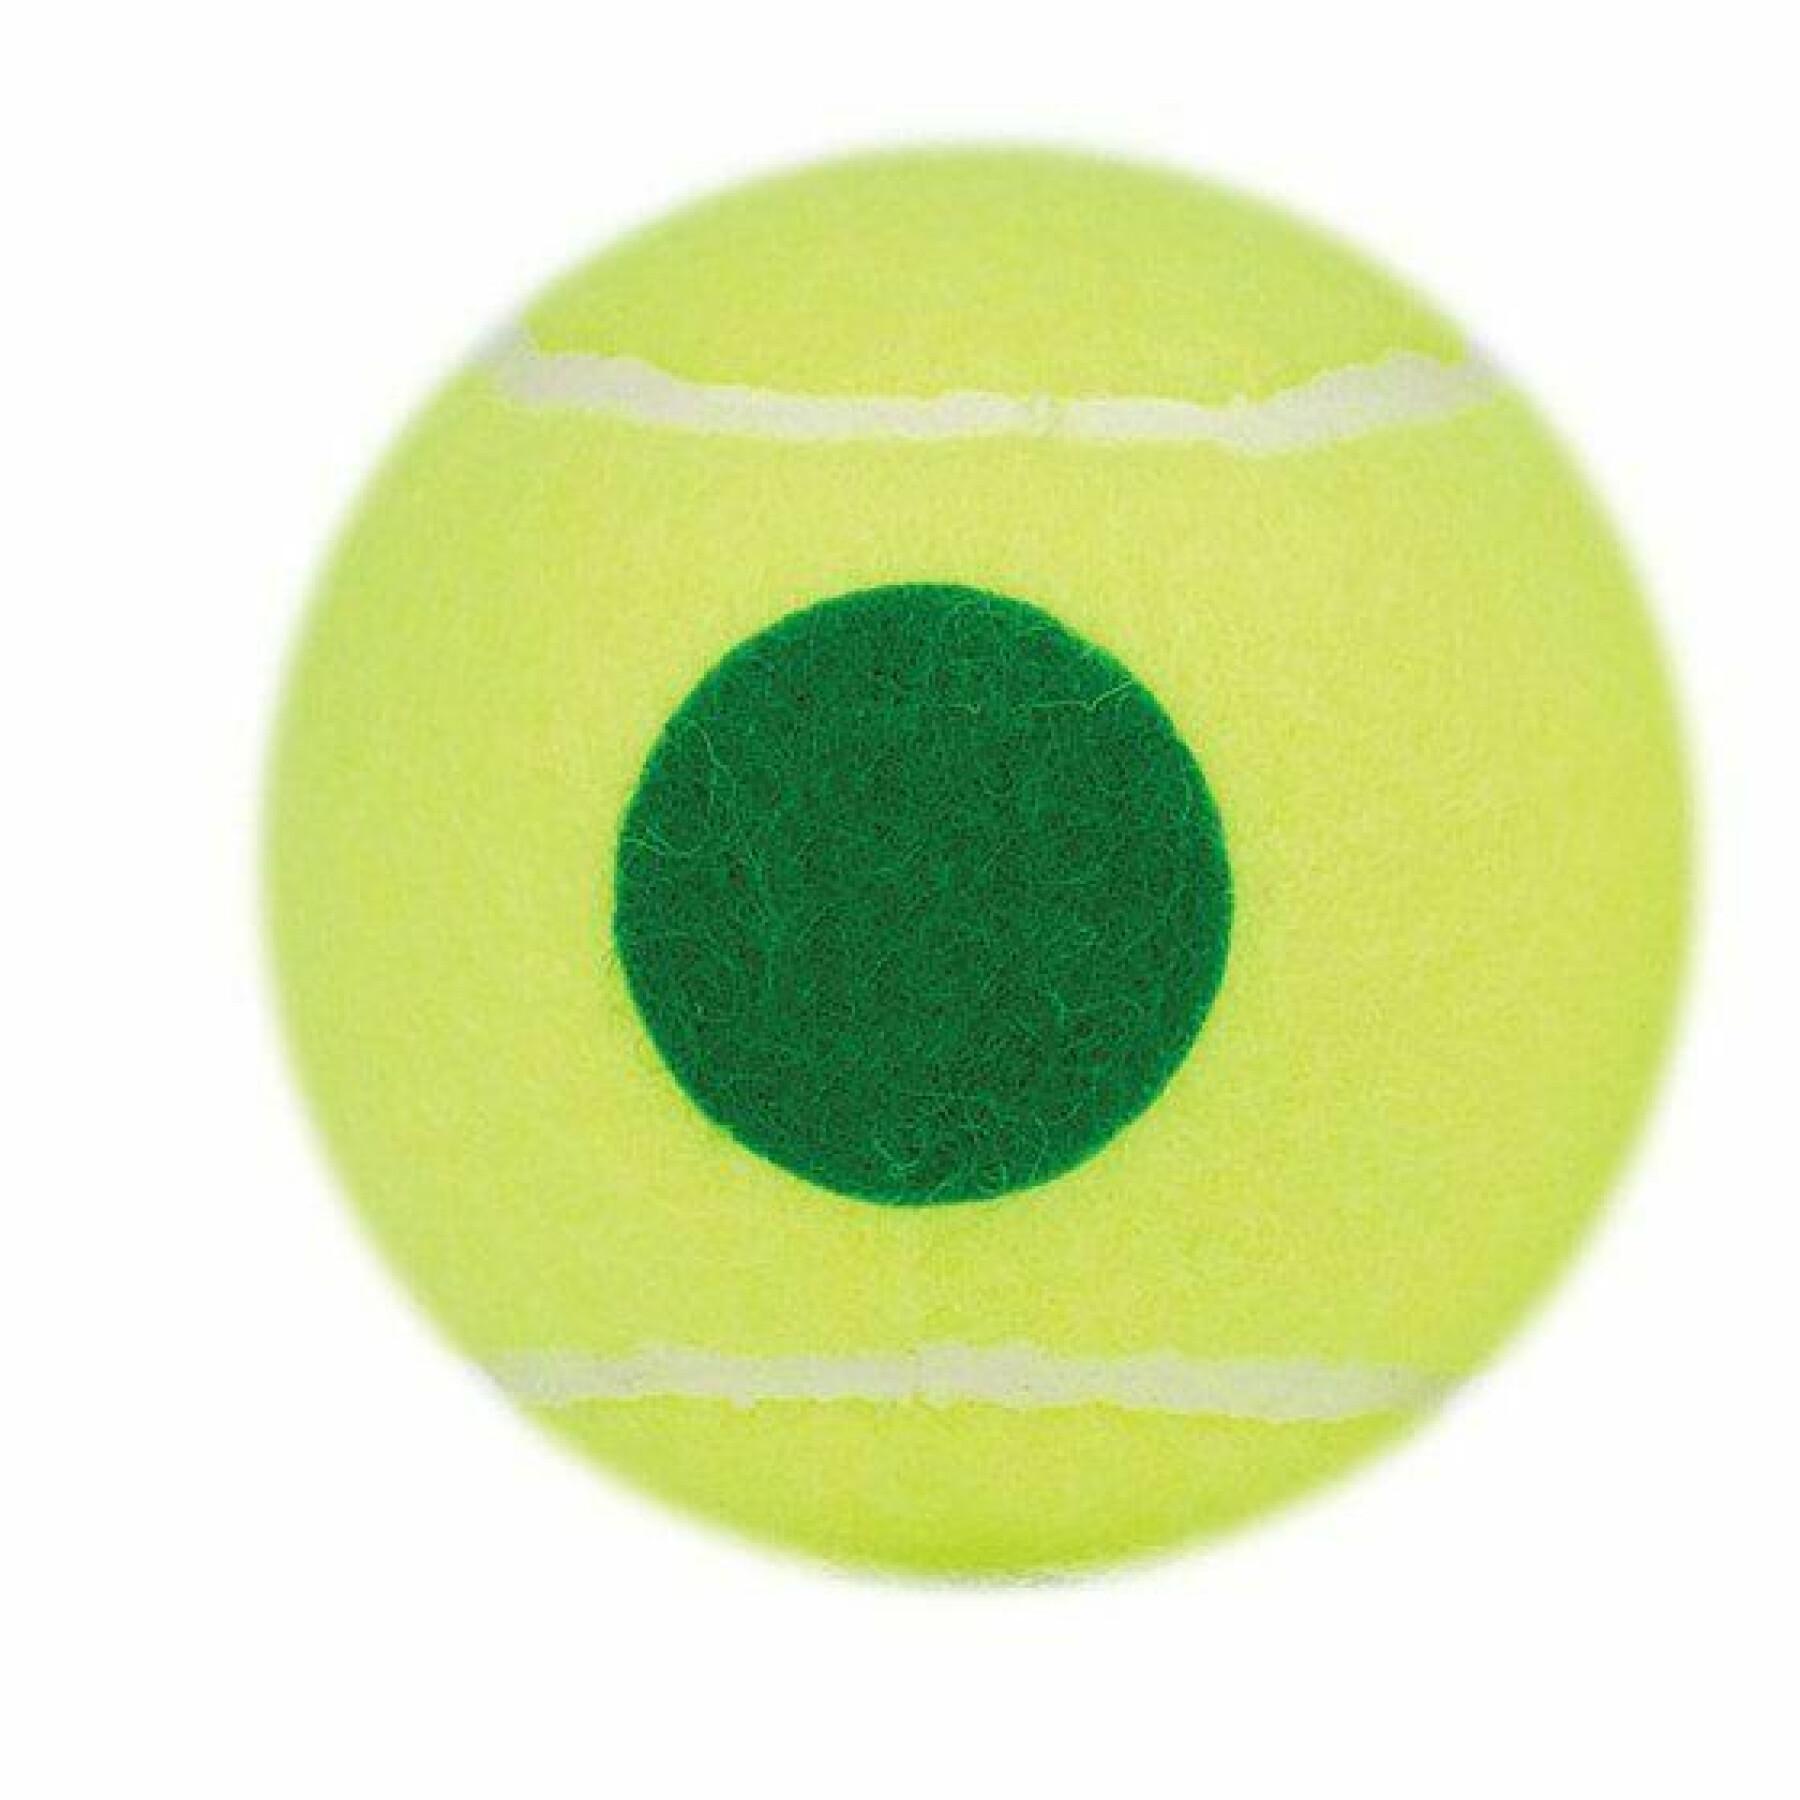 Tube of 3 tennis balls Prince Play & Stay - stage 1